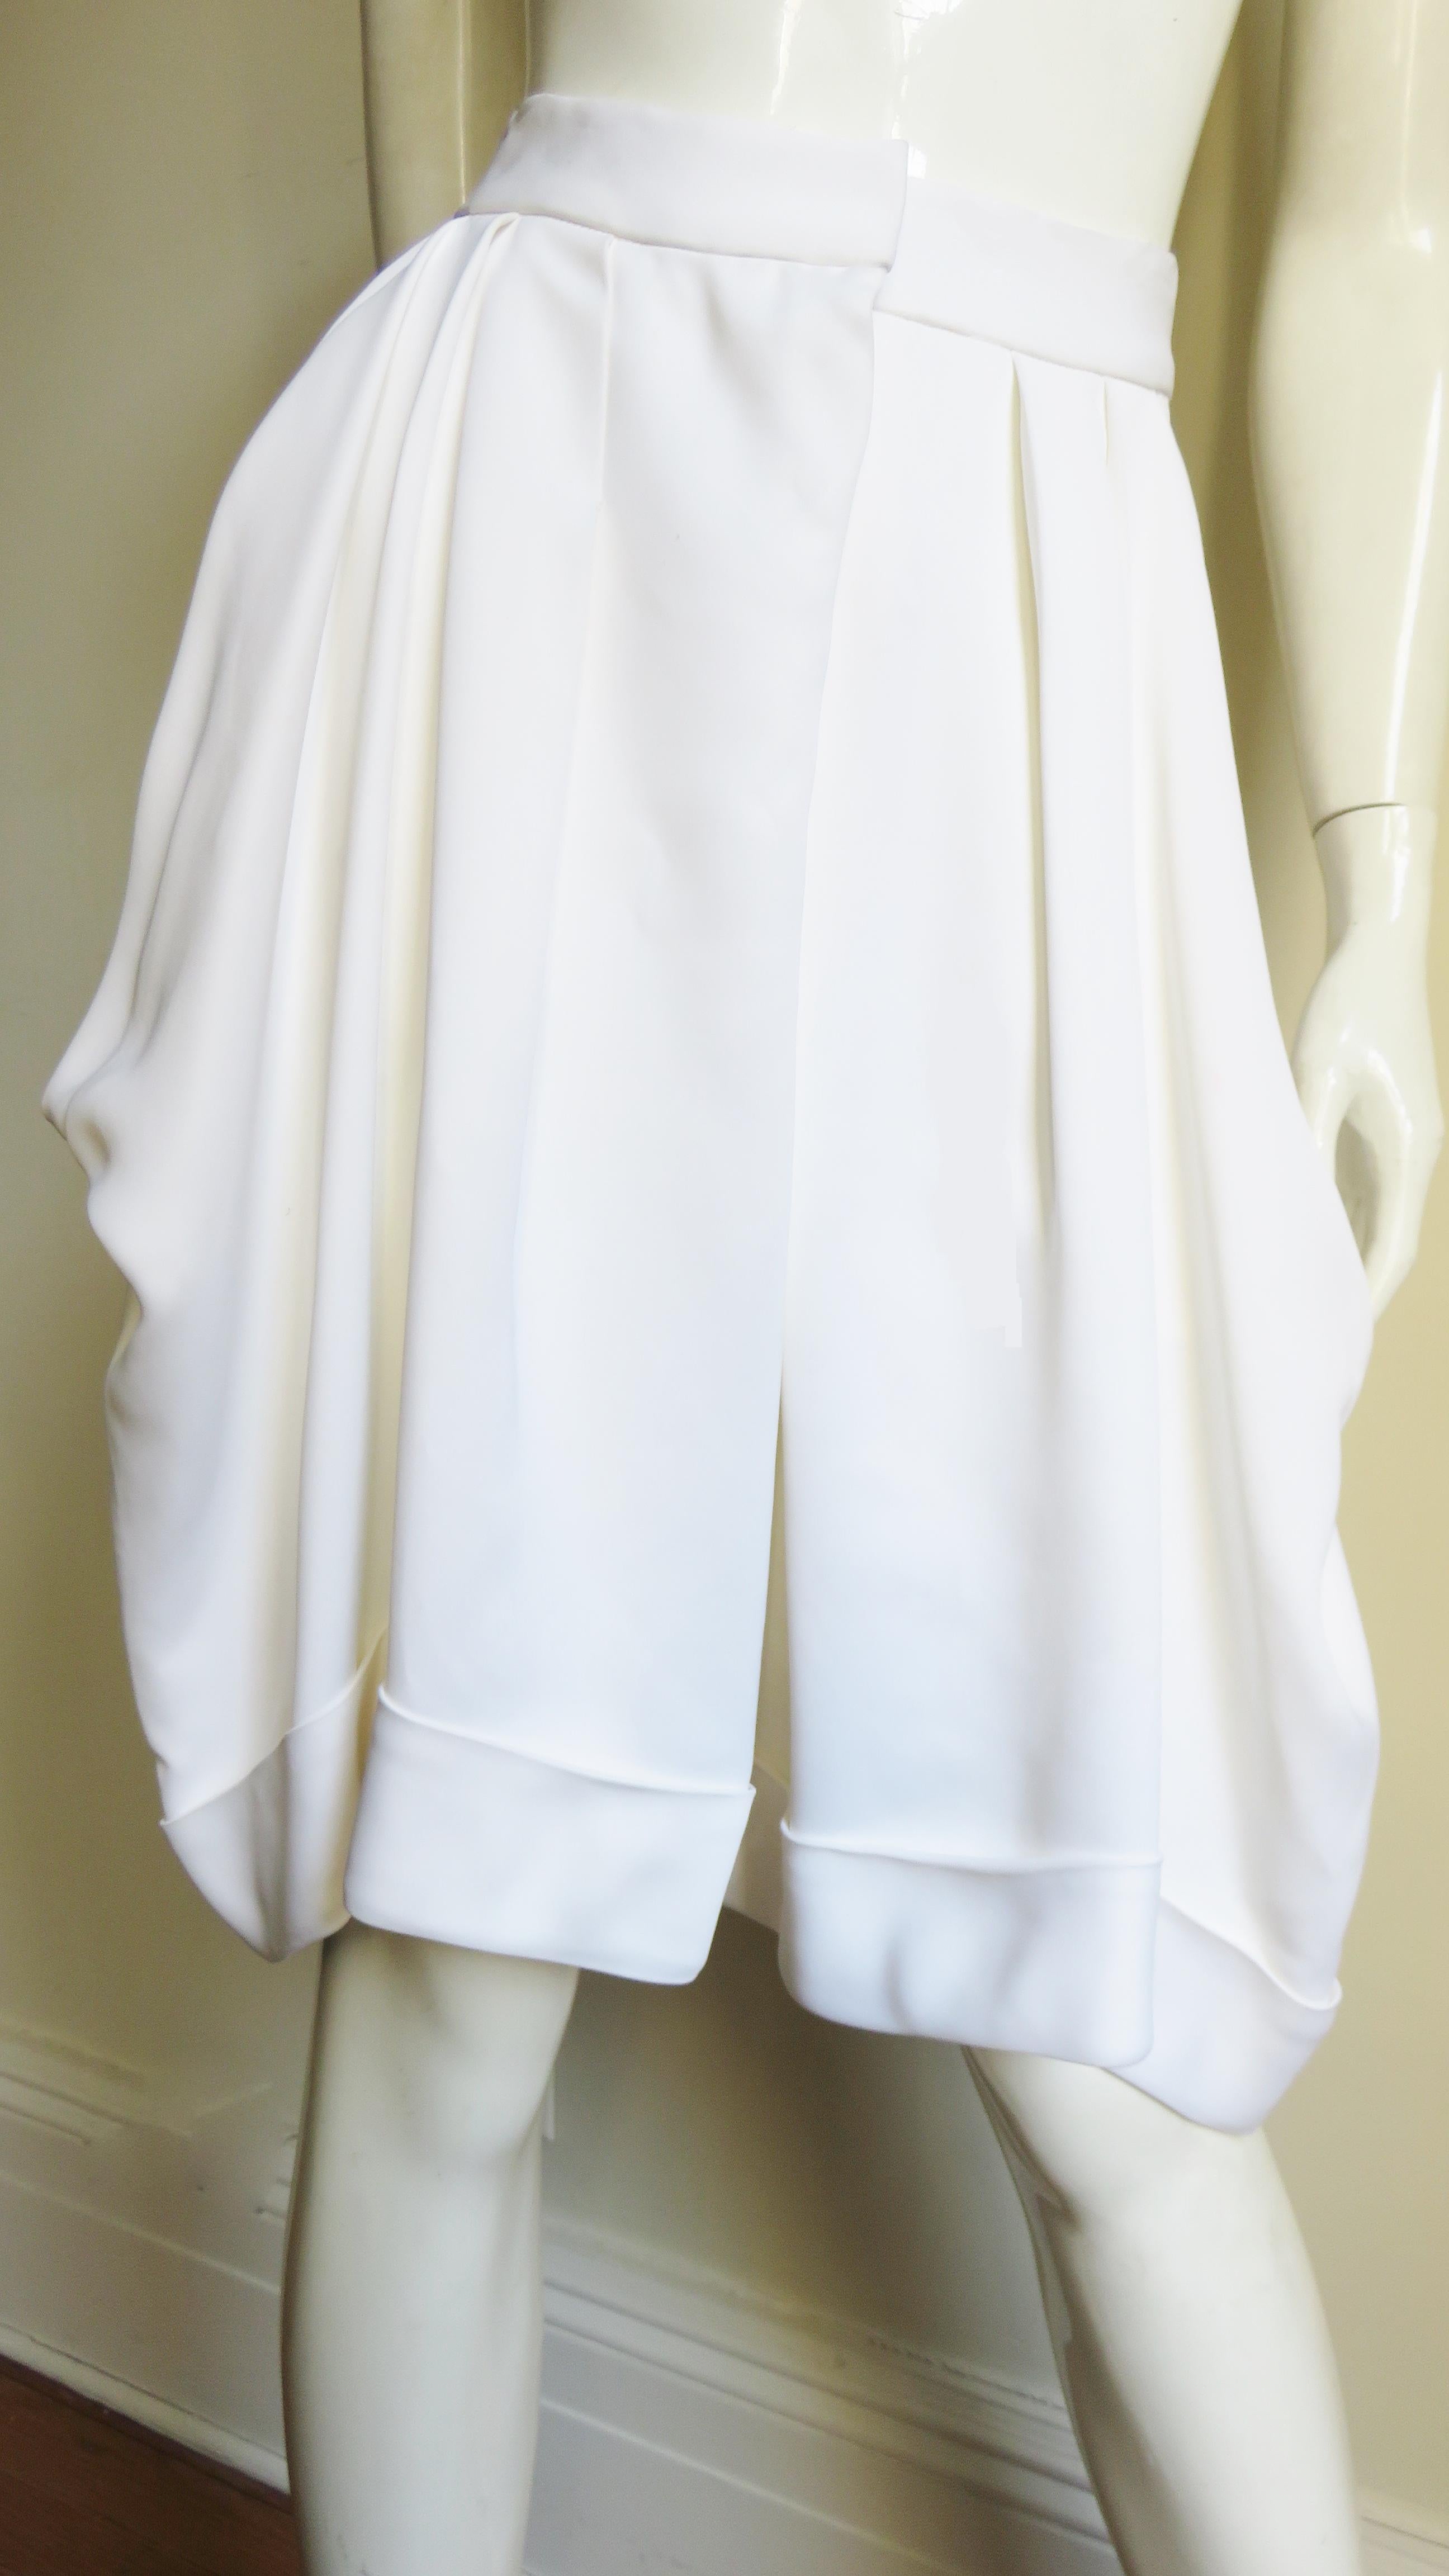 Beautiful white shorts/skirt from John Galliano.  They have a waistband, a cuffed hem, draped side pockets and a front zipper closing.  
Fits sizes Small, Medium. Marked Italian size 40.

Waist  28